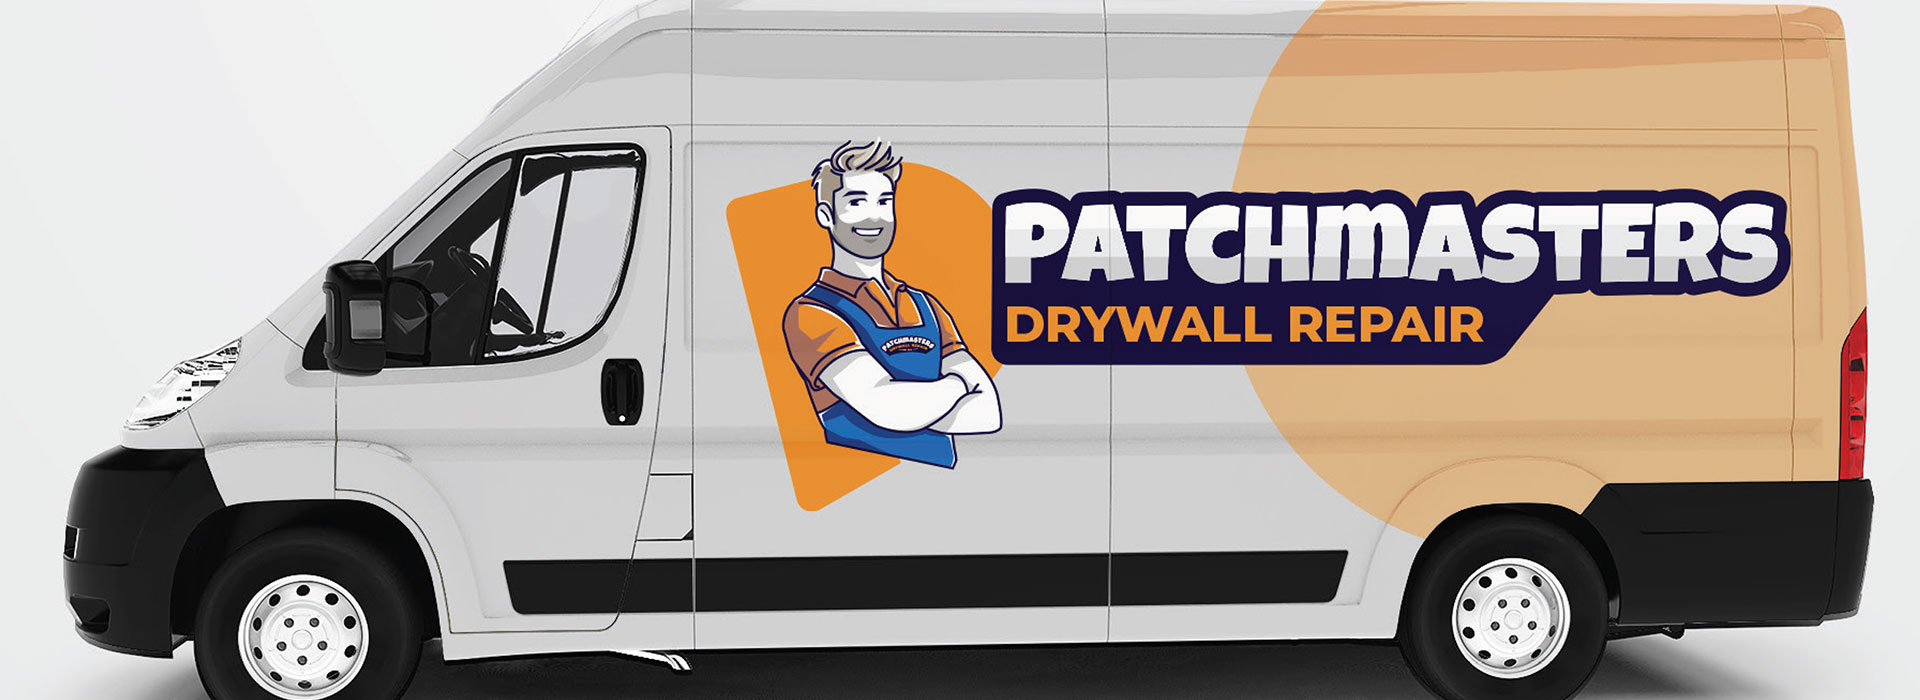 Patchmasters History - serving all your drywall needs in and around Calgary, Alberta. 